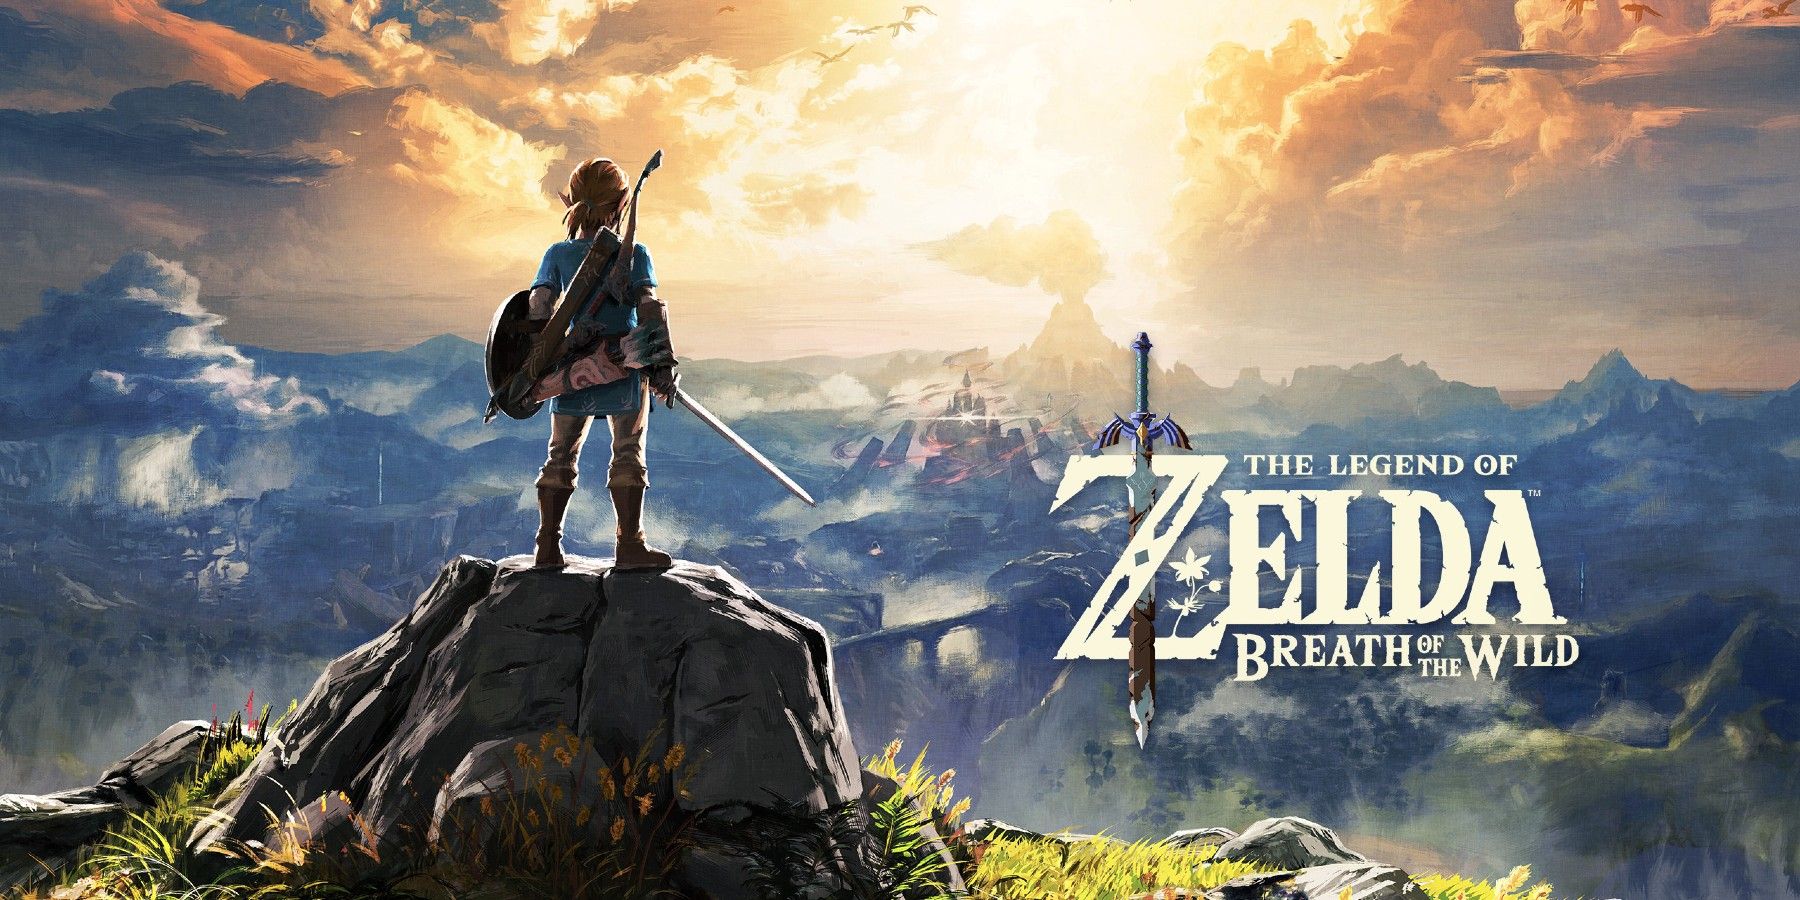 Artist Shares Zelda Breath of the Wild SNES-Style Title Screen